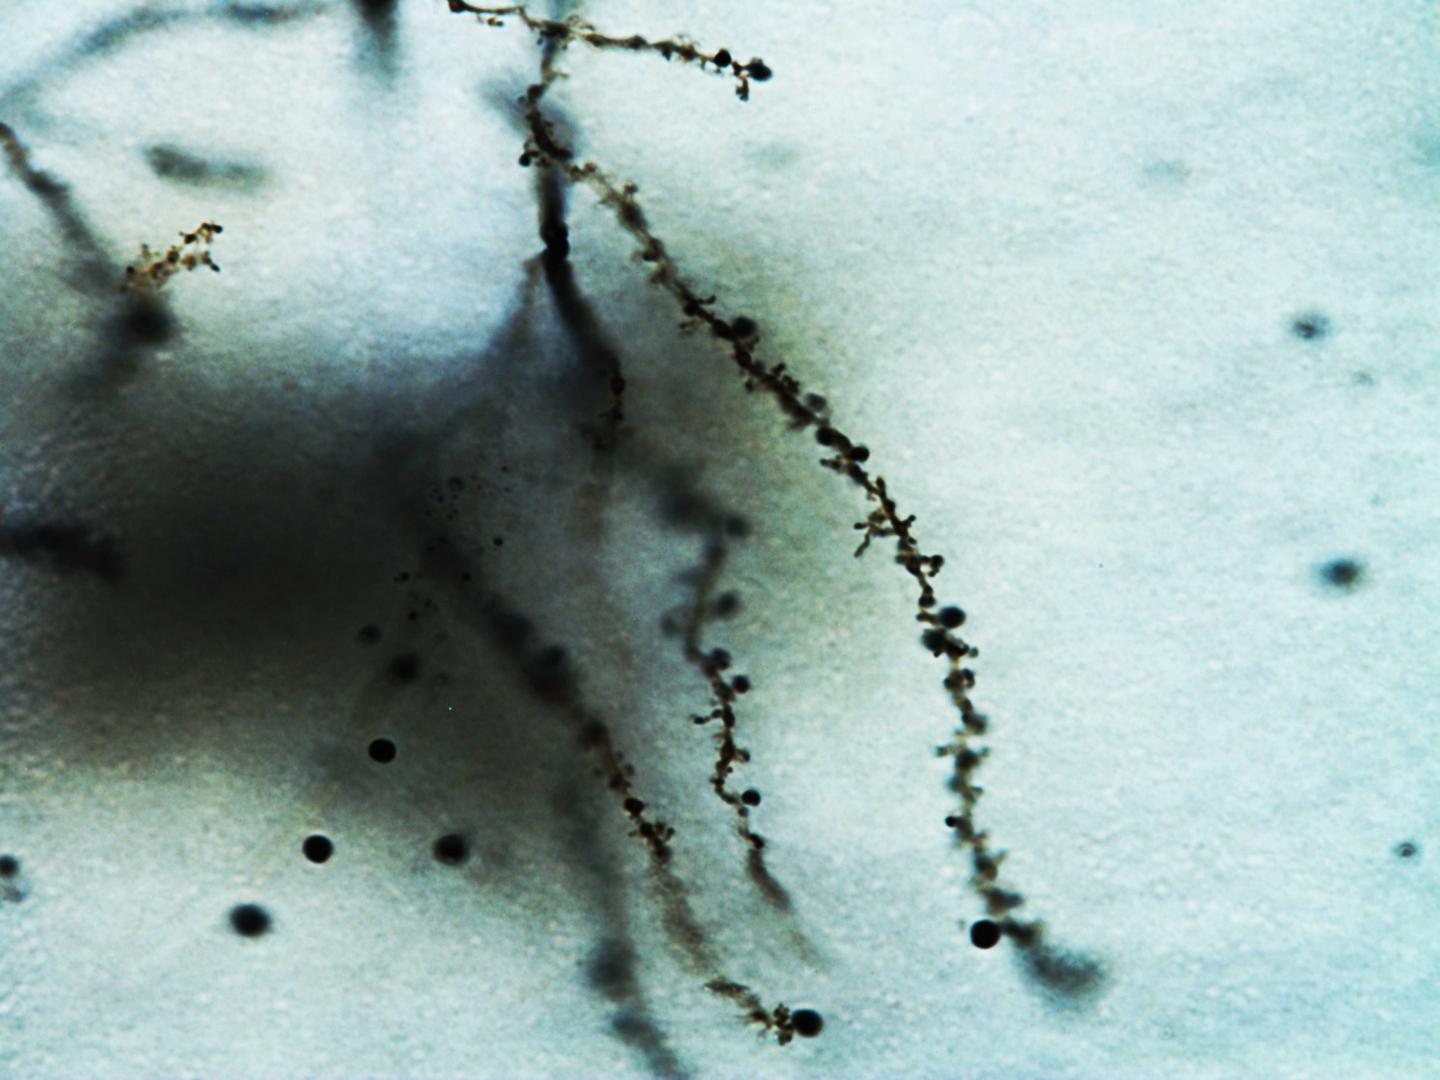 An Abnormal Dendrite of a Neuron from FXS Mice